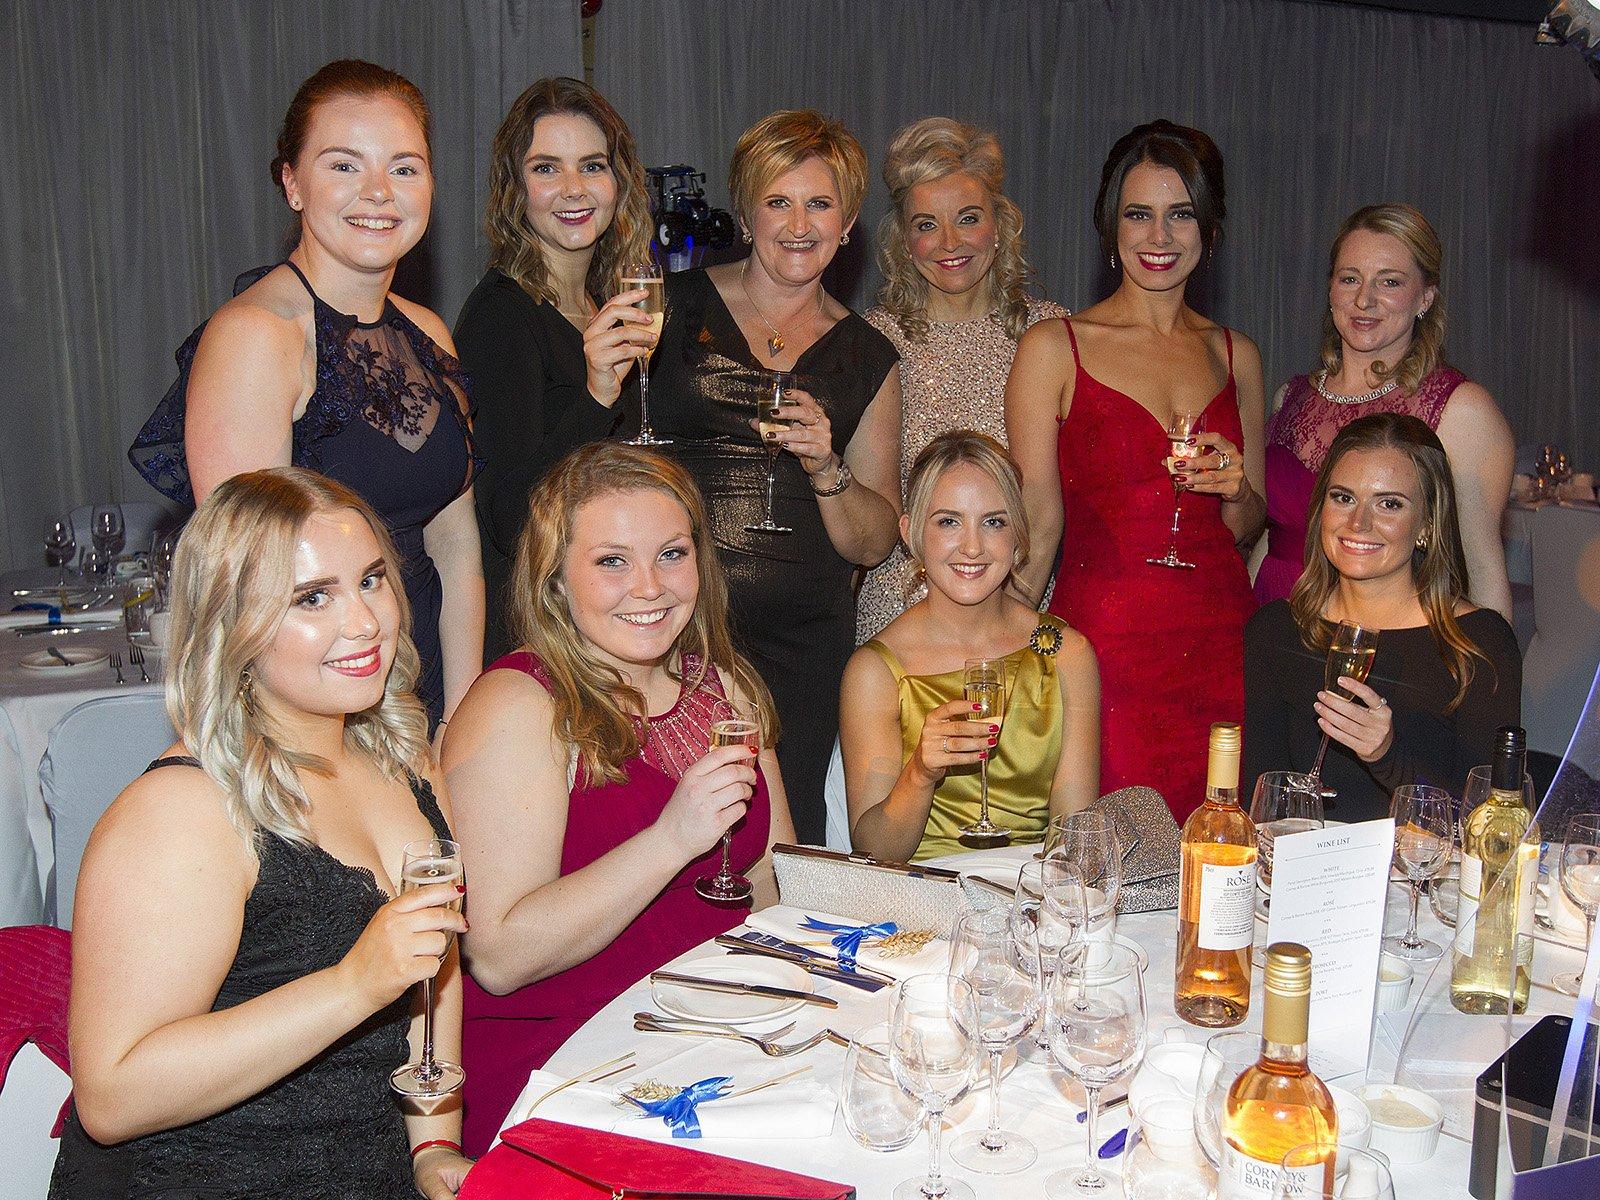 Natasha Gray, Molly Seed, Sally Jarvis, Caroline Tice, Sheryl Macauley, Ginny Stewart with, front, Jody Cree, Jessica Howlett, Mel Foggon and Becky Johnston at Saturday's ball in Kelso in memory of George Crawford.